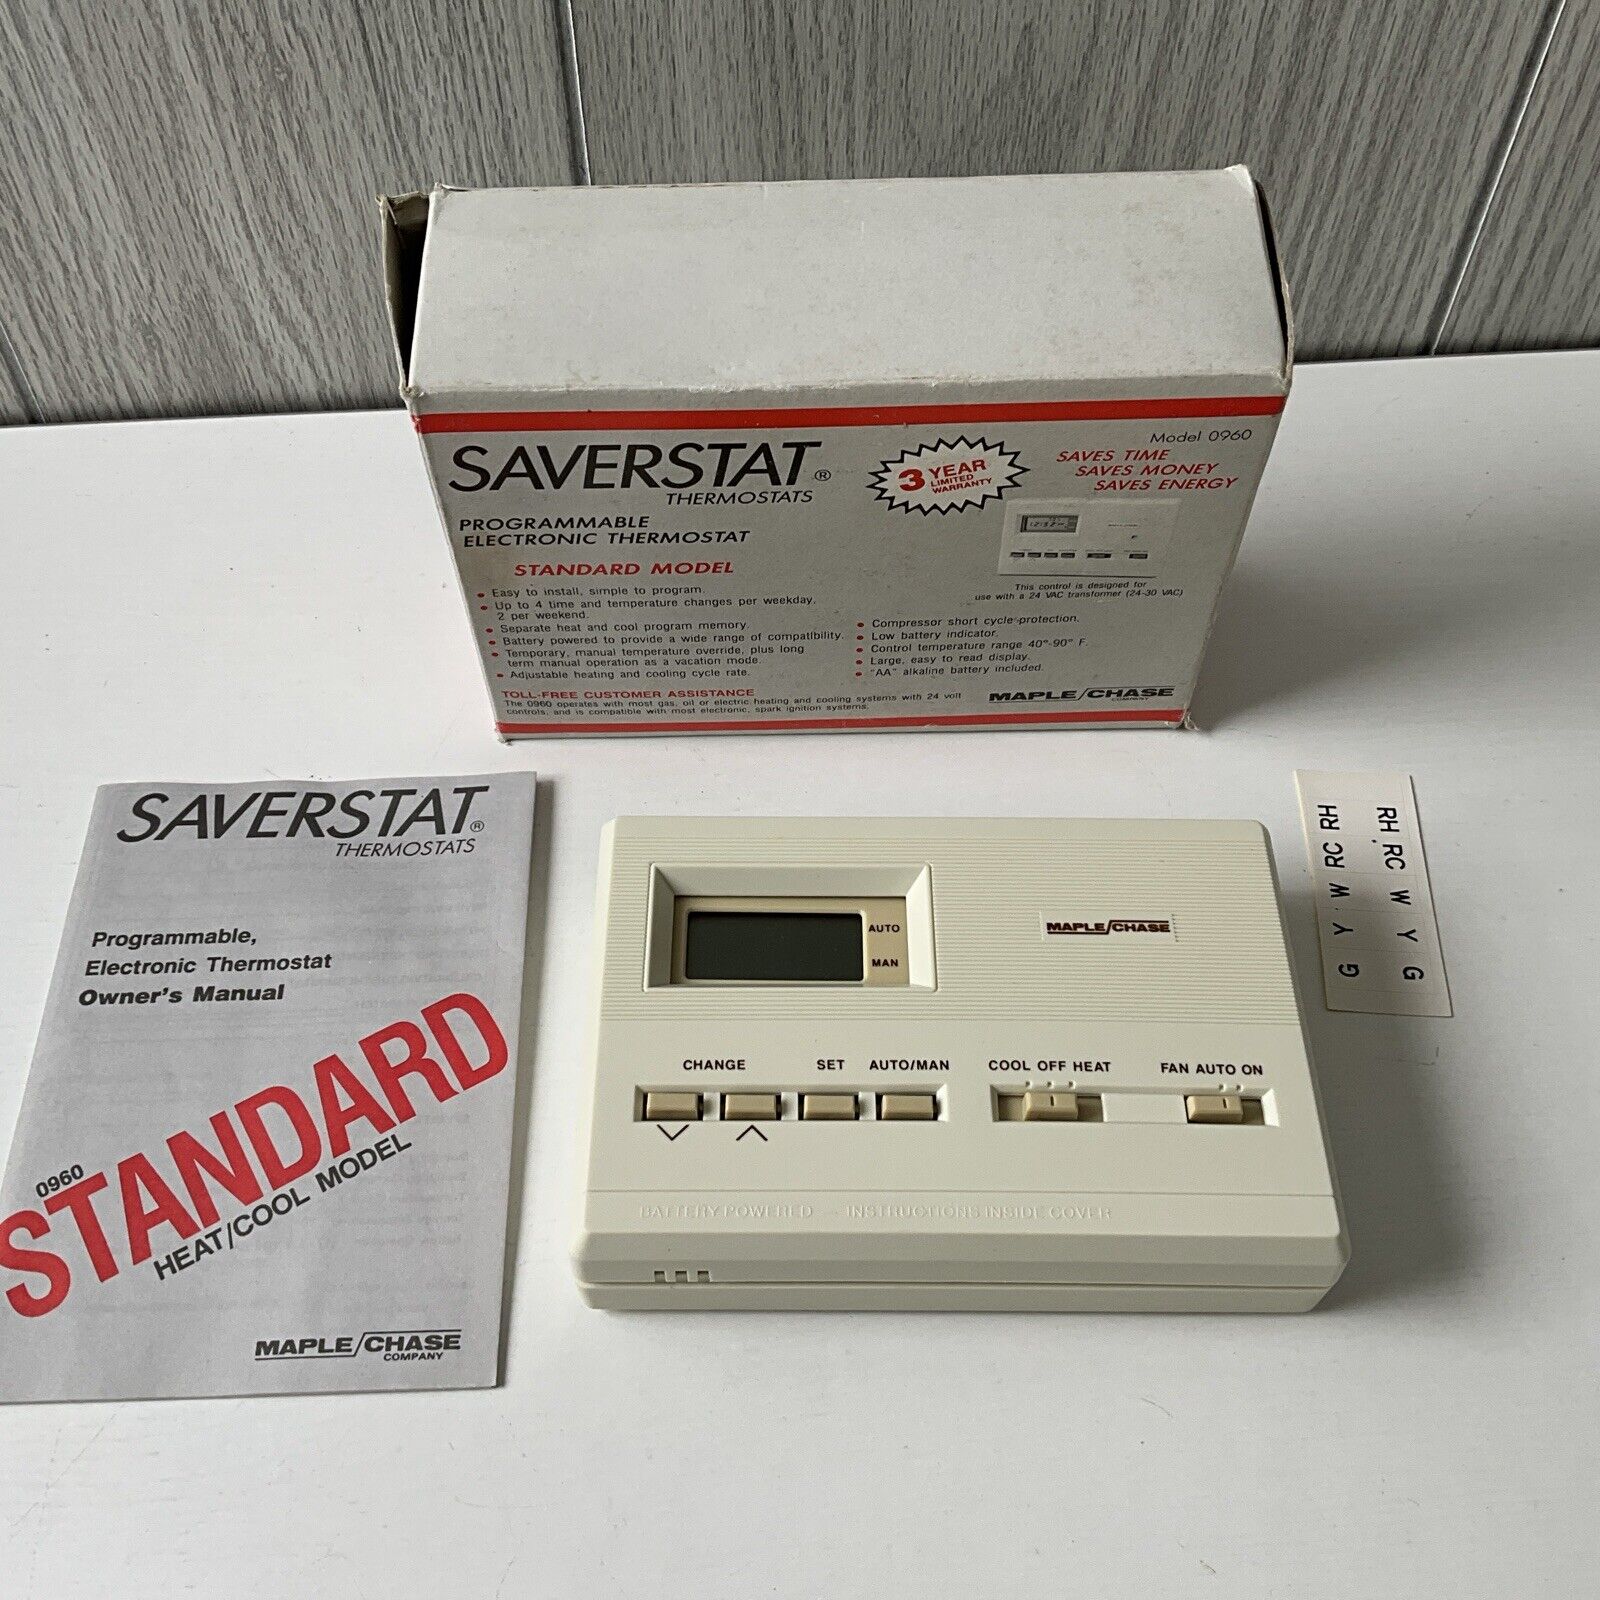 Maple Chase Saverstat Thermostats #0960 Programmable Electronic Thermostat (C1)